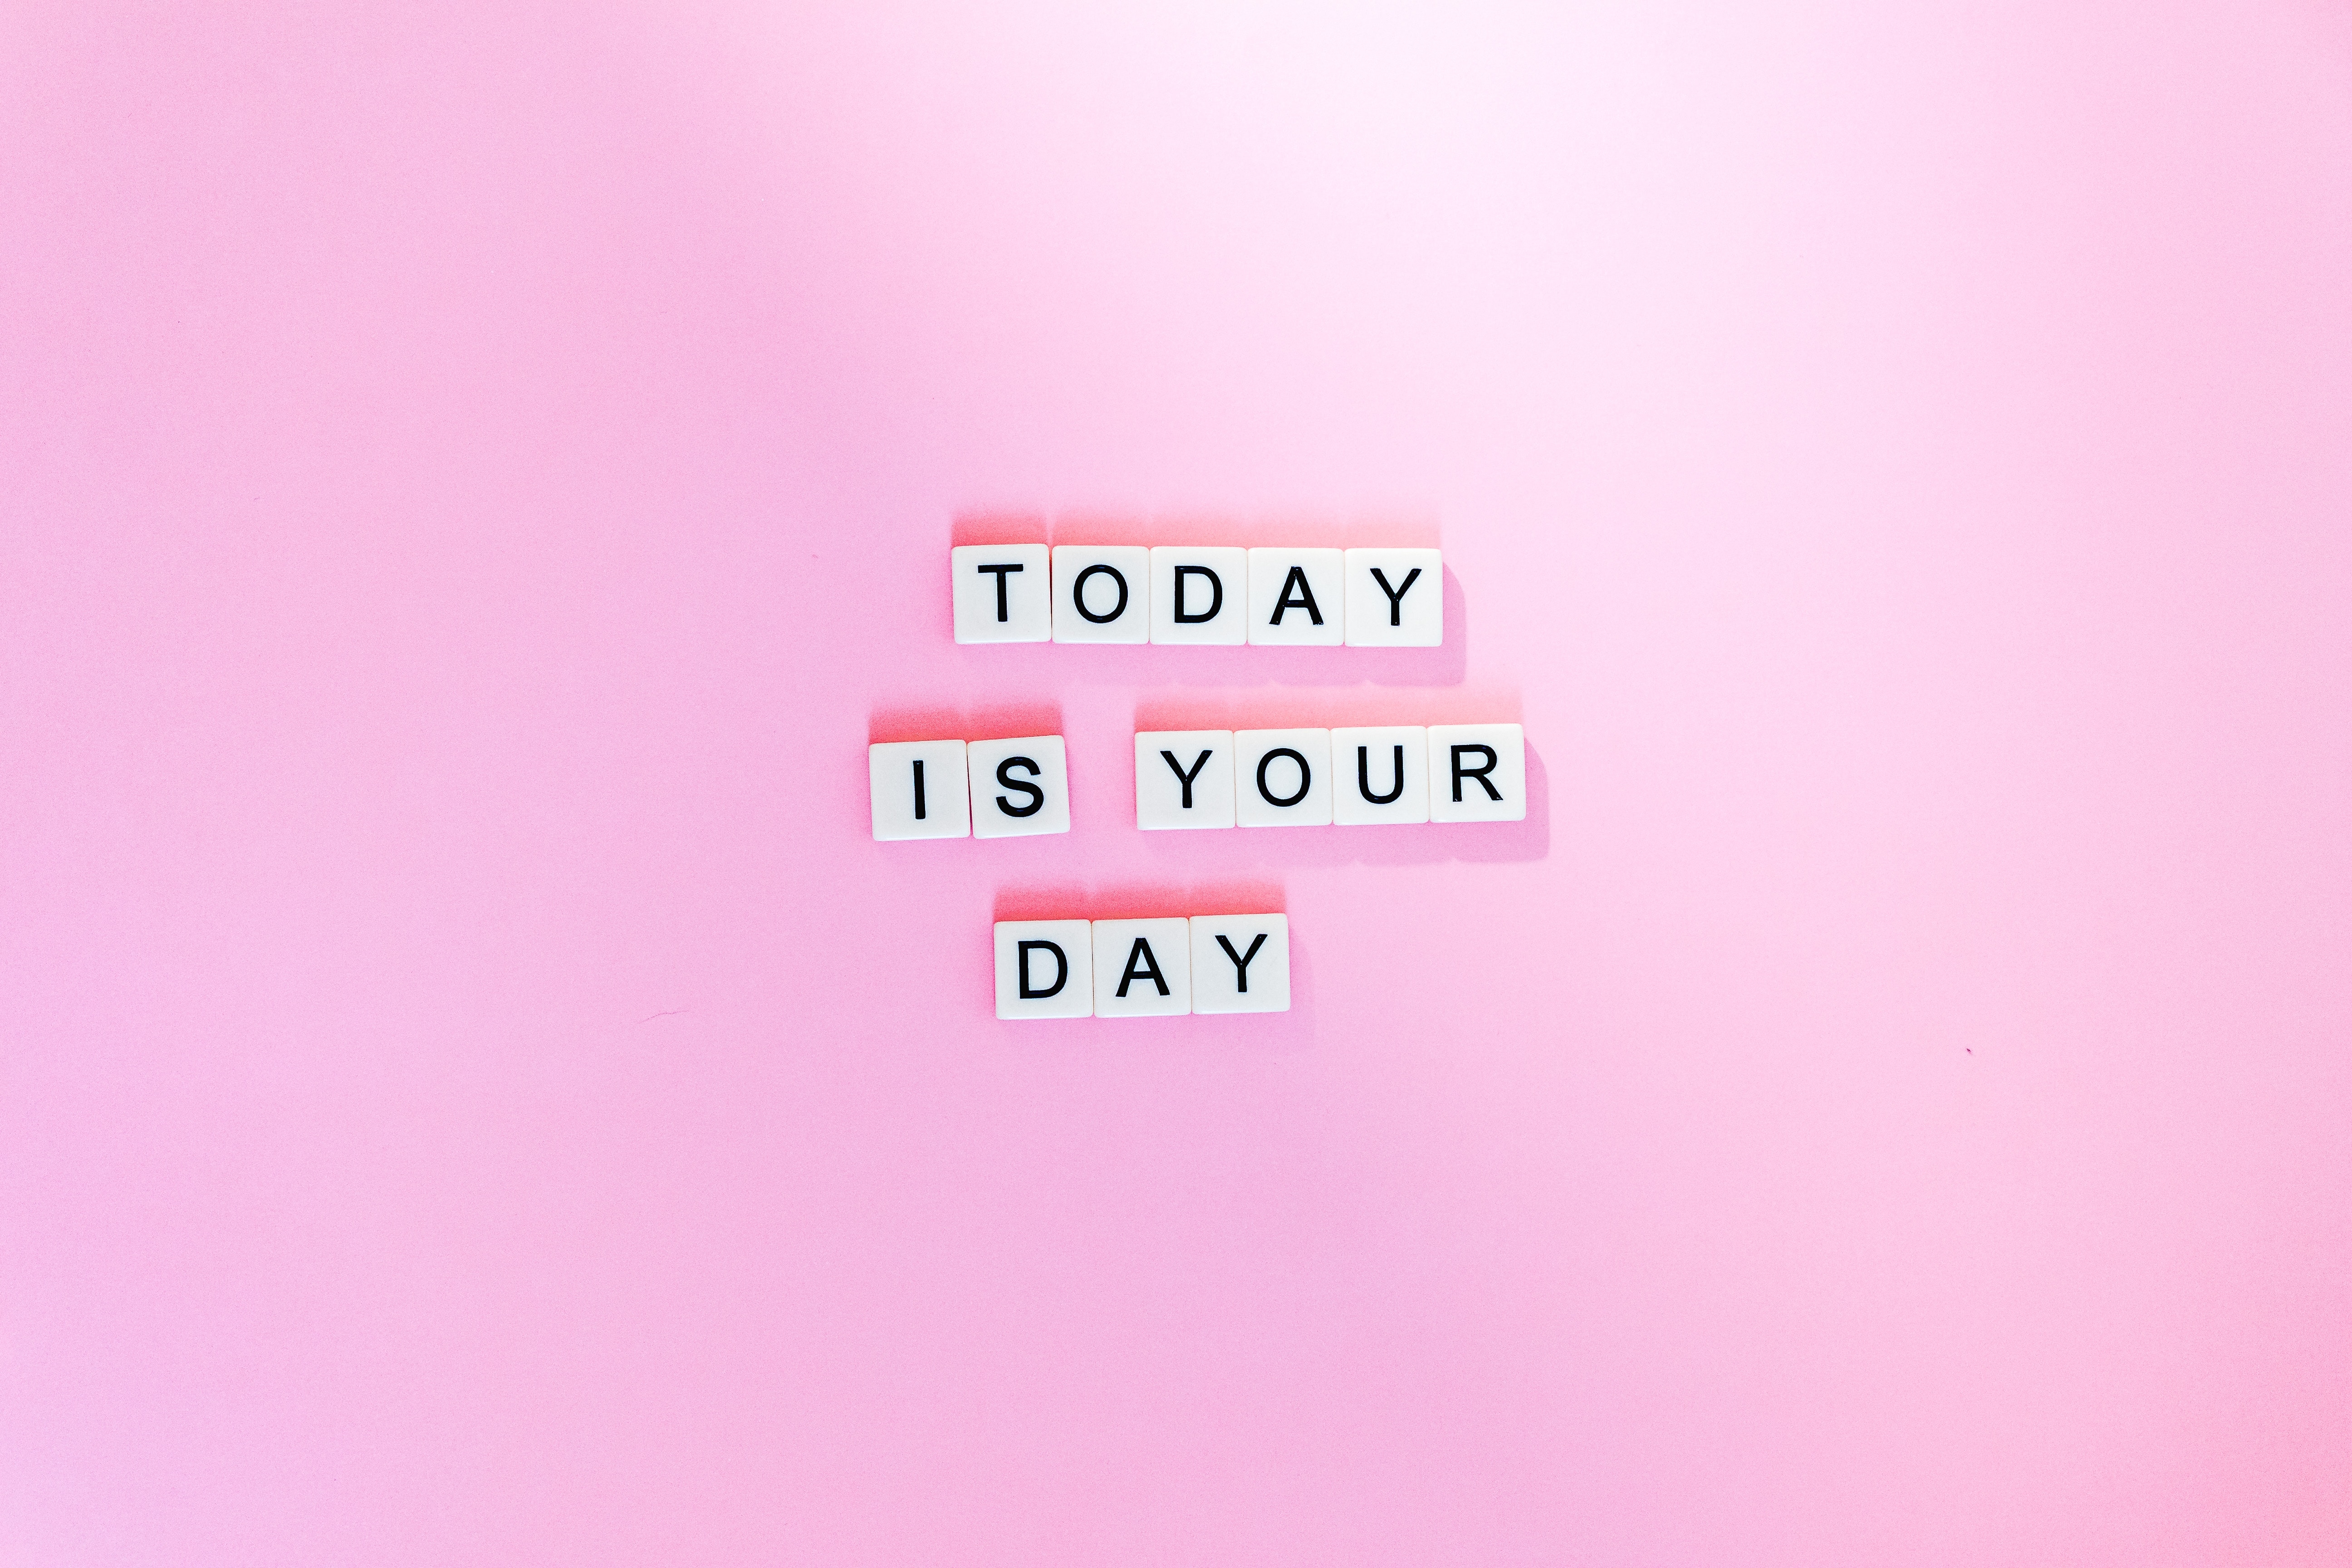 Wallpapers Today is your day motivational quotes pink background on the desktop